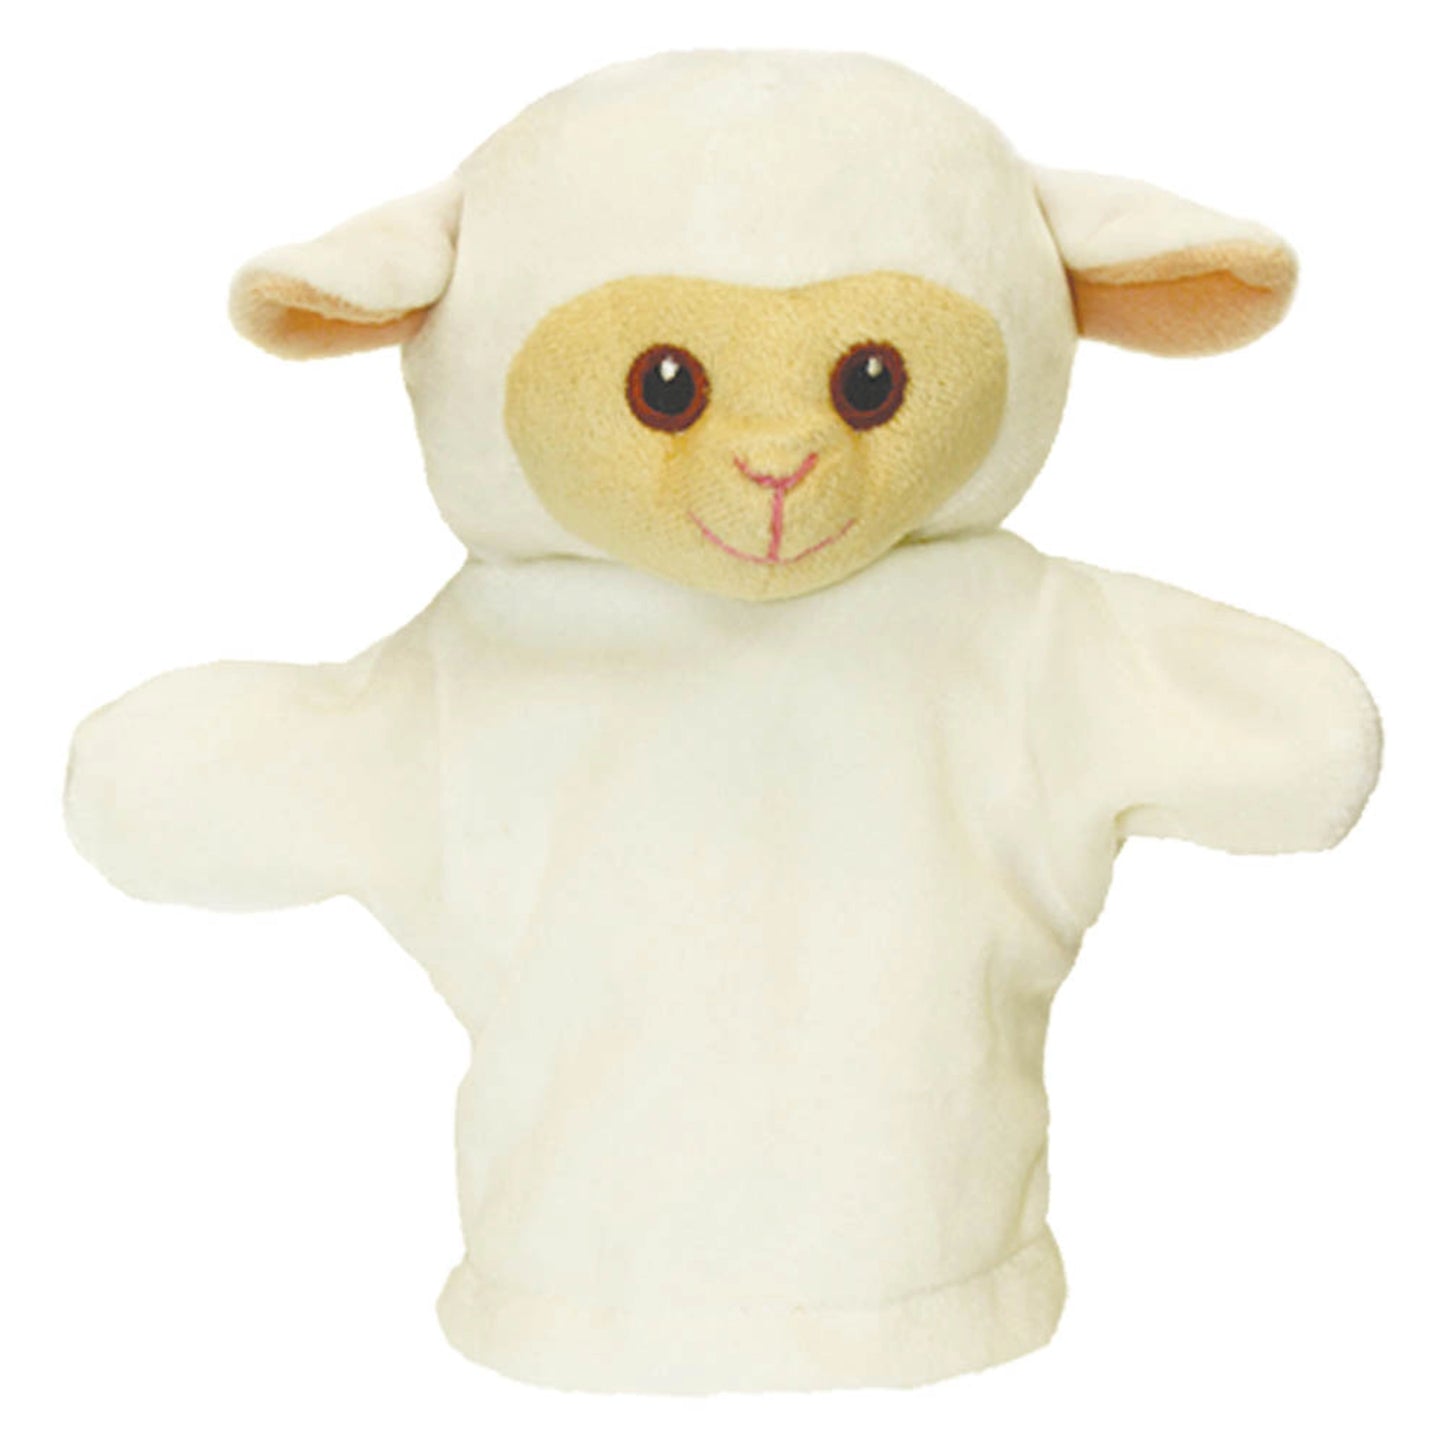 My First Puppet - Lamb - The Puppet Company - The Forgotten Toy Shop